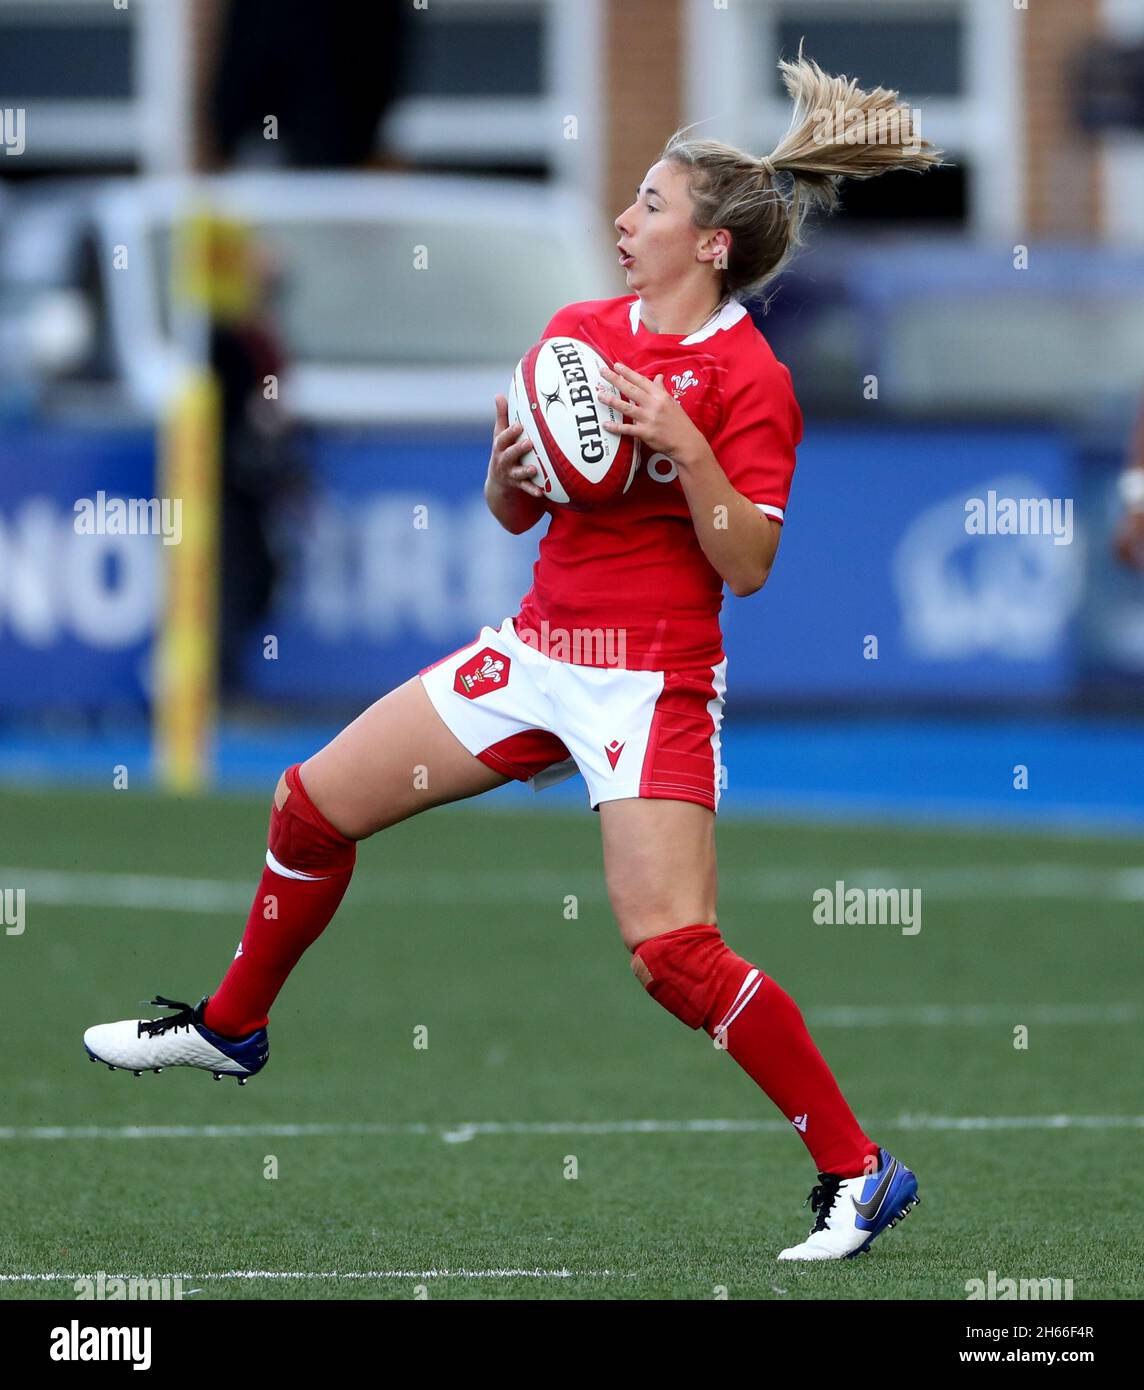 Wales’ Elinor Snowsill during the Autumn International match at Cardiff Arms park, Cardiff. Picture date: Saturday November 13, 2021. See PA story RUGBYU Wales Women. Photo credit should read: Bradley Collyer/PA Wire. RESTRICTIONS: Use subject to restrictions. Editorial use only, no commercial use without prior consent from rights holder. Stock Photo